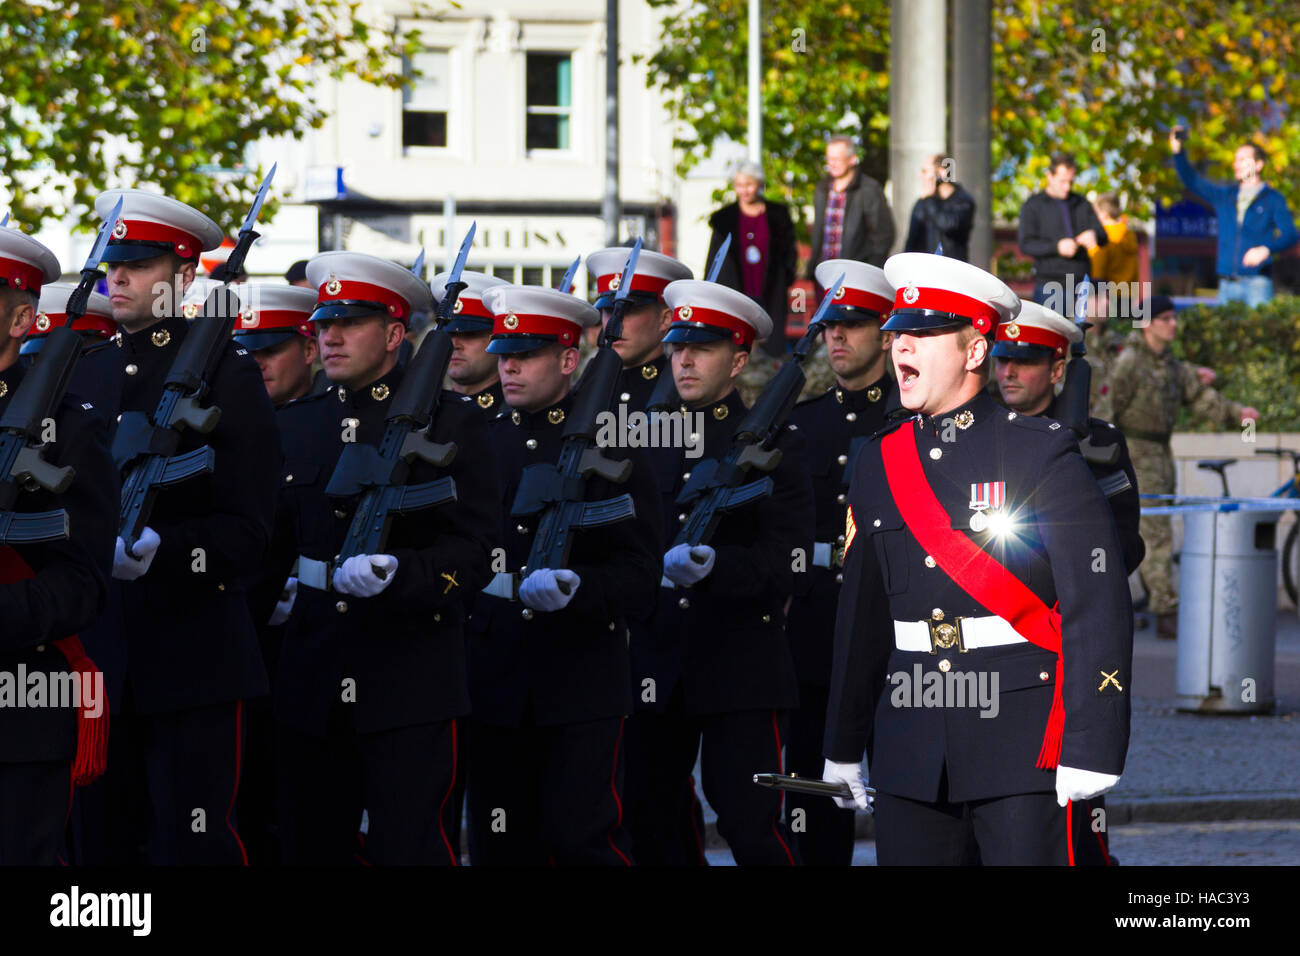 Participants in the Remembrance Day Parade, Bristol, UK, 2016 Stock Photo